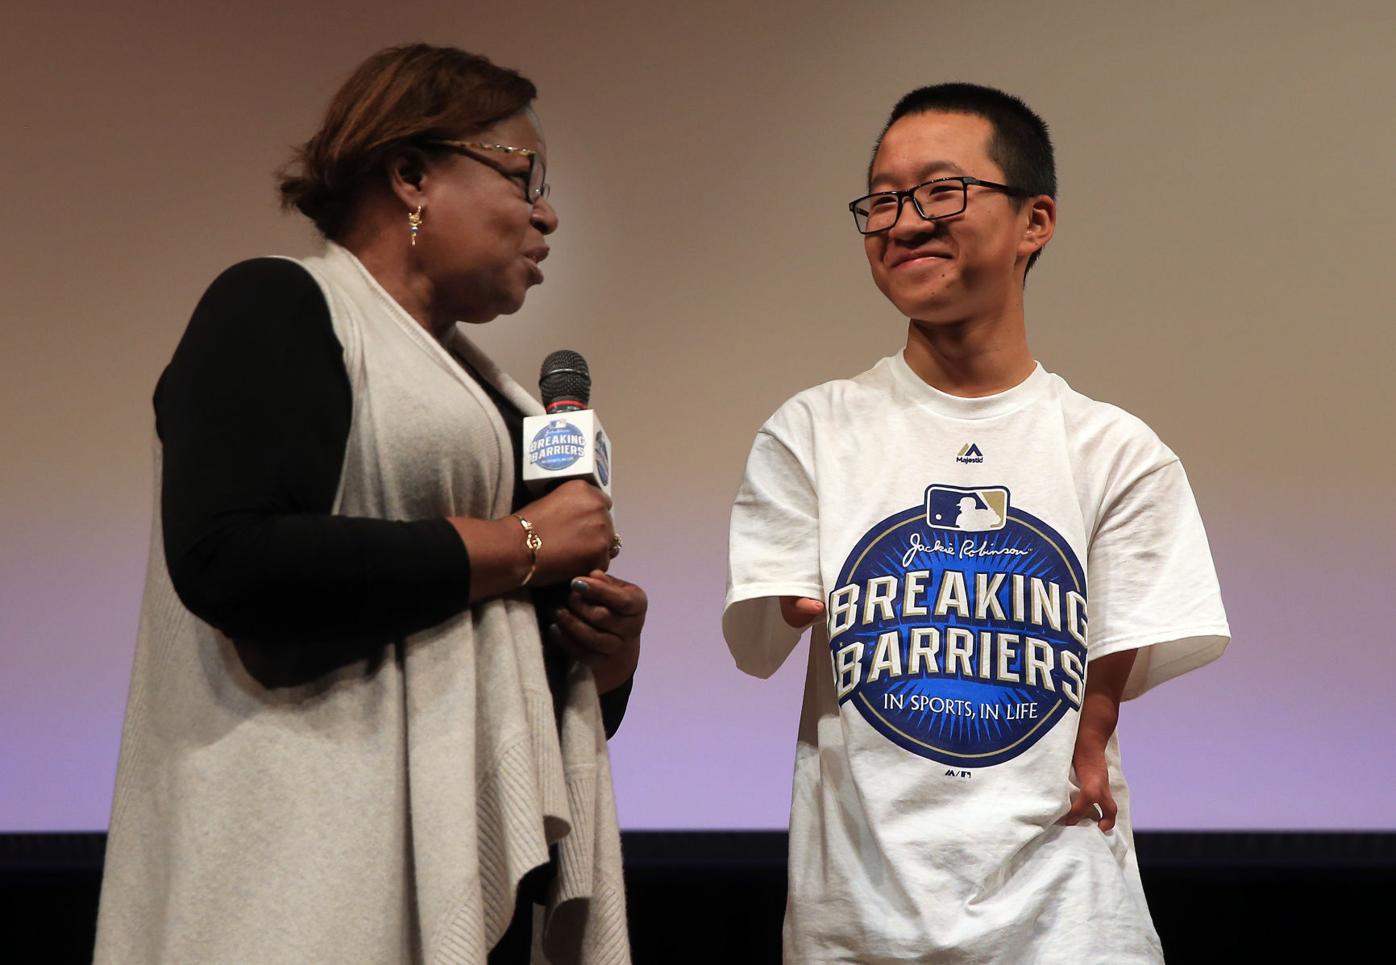 South's Jesse Quist wins MLB's Breaking Barriers essay contest